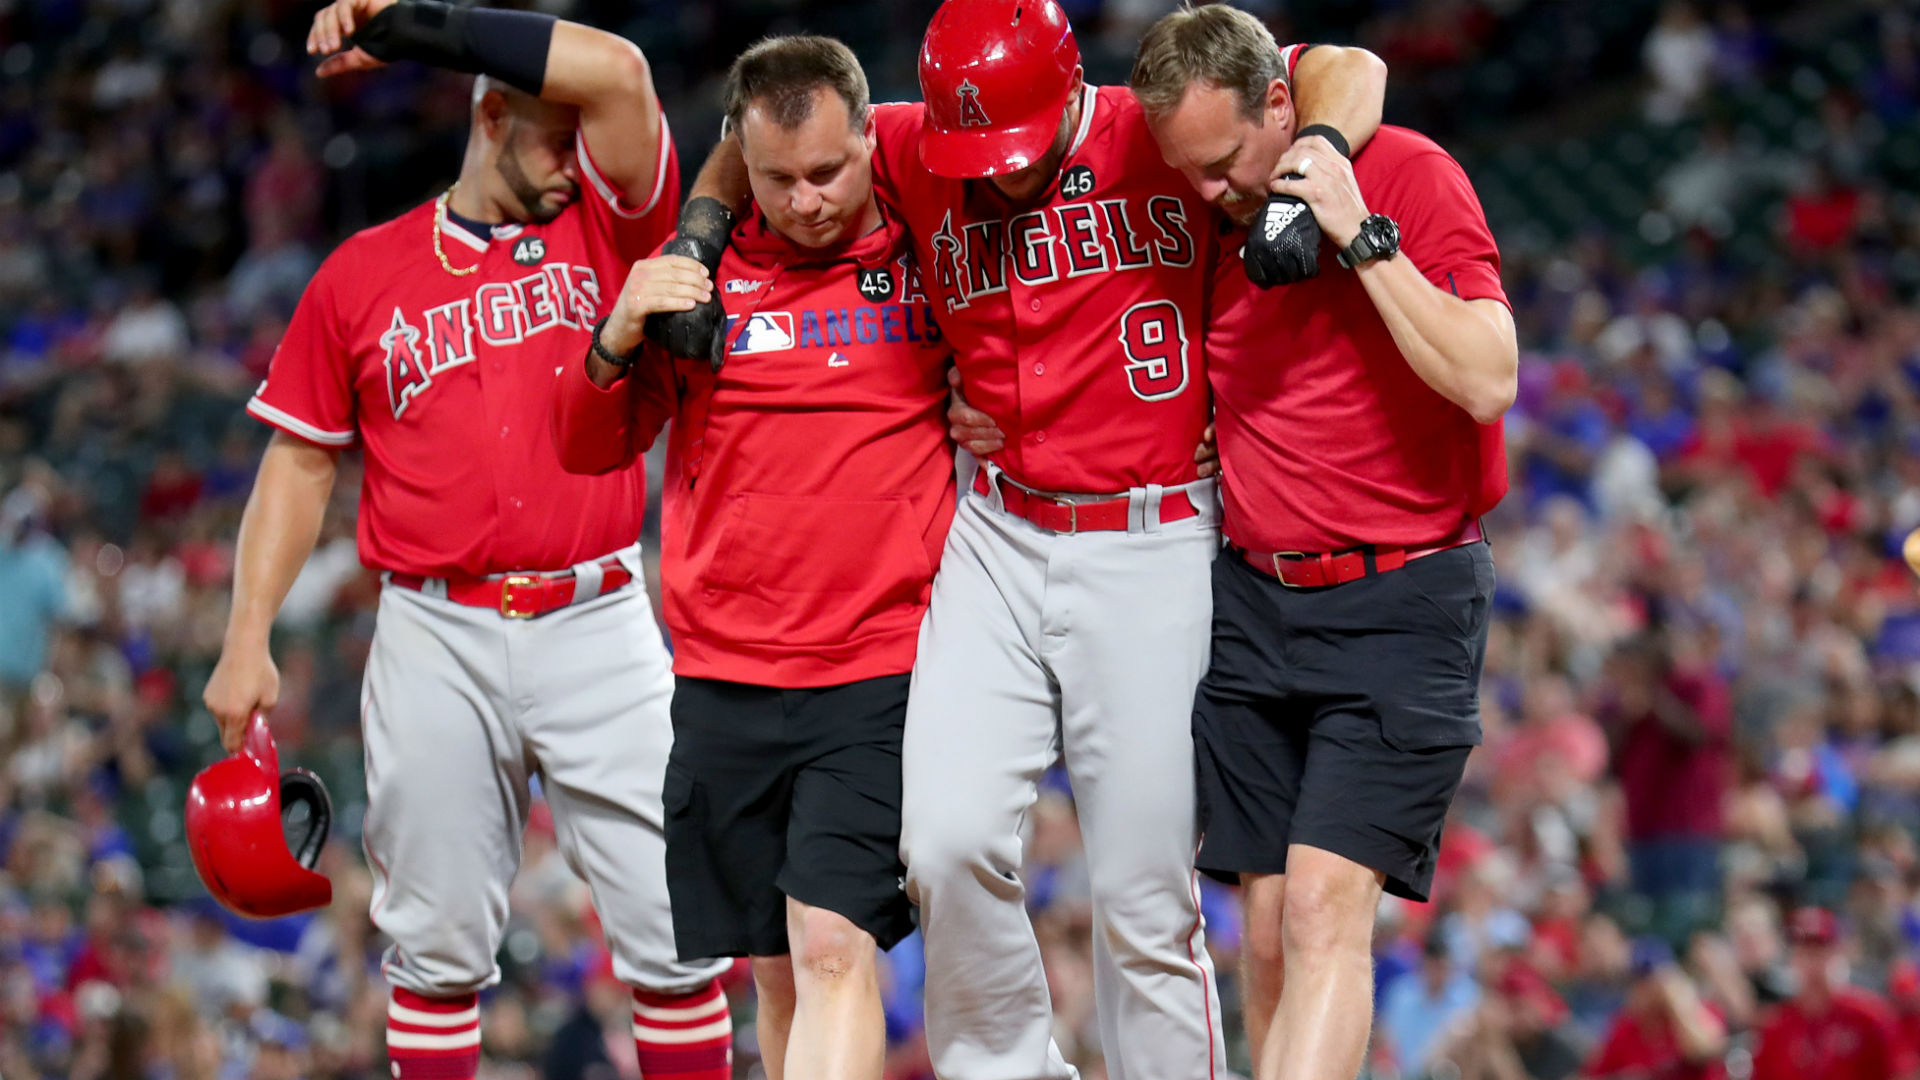 Angels outfielder Brian Goodwin will also undergo further evaluation after being hit by a pitch on his right wrist in Tuesday's game.